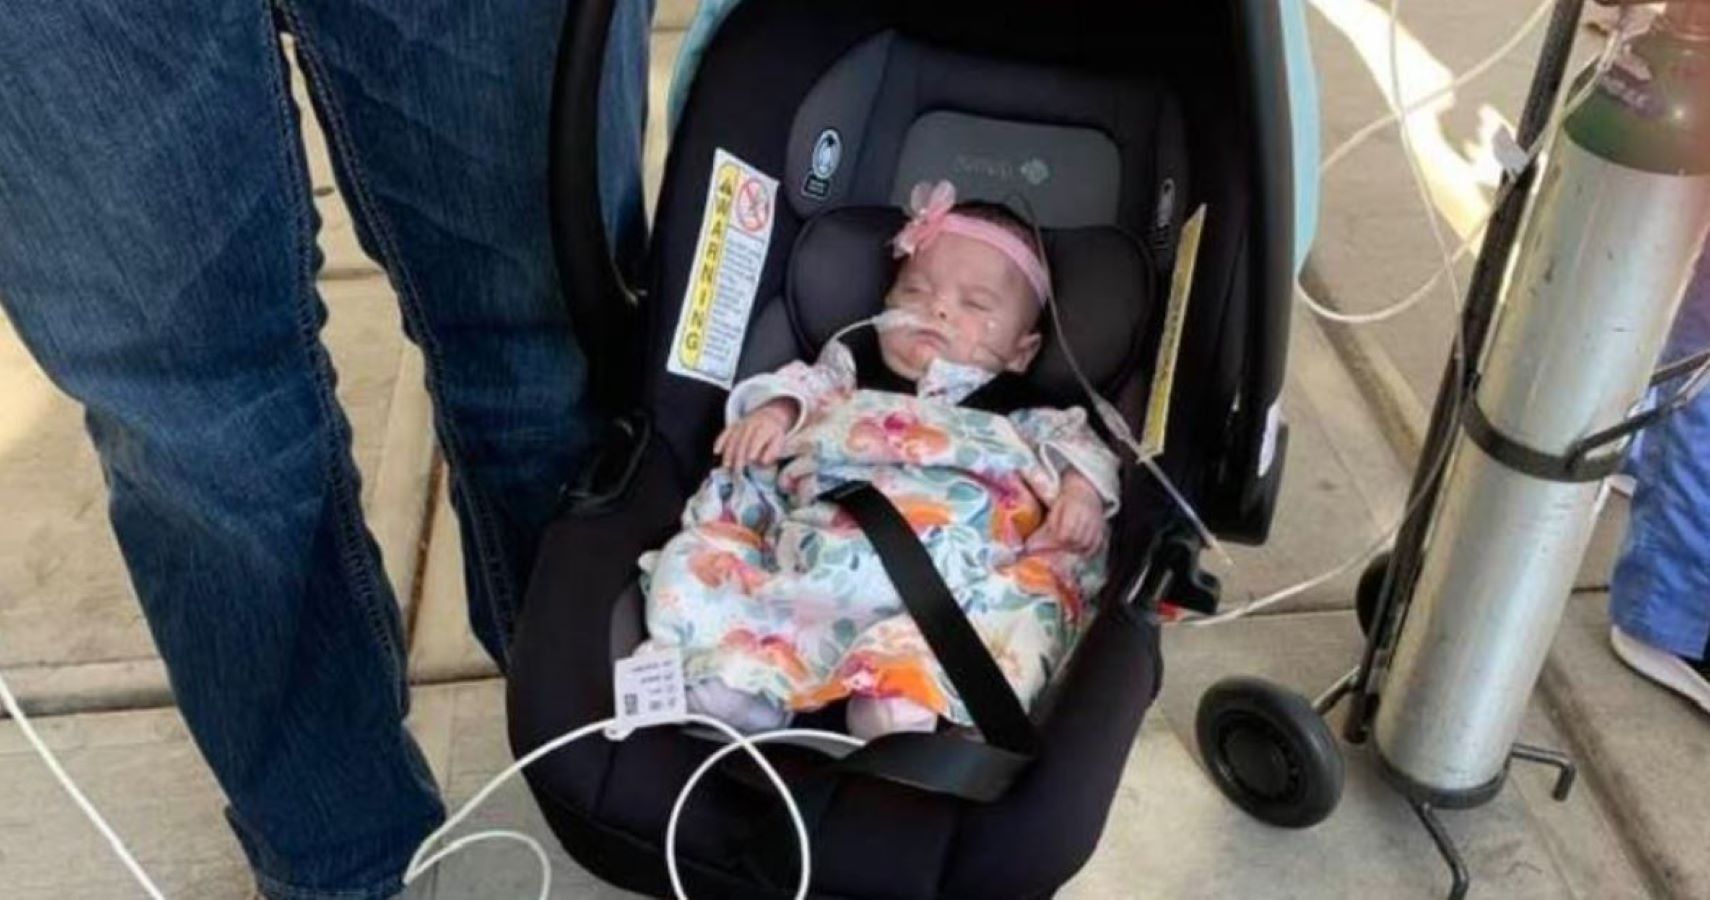 ‘Miracle’ Micro-Preemie Born Weighing Less Than 1 Lb. Goes Home 4 Months Later